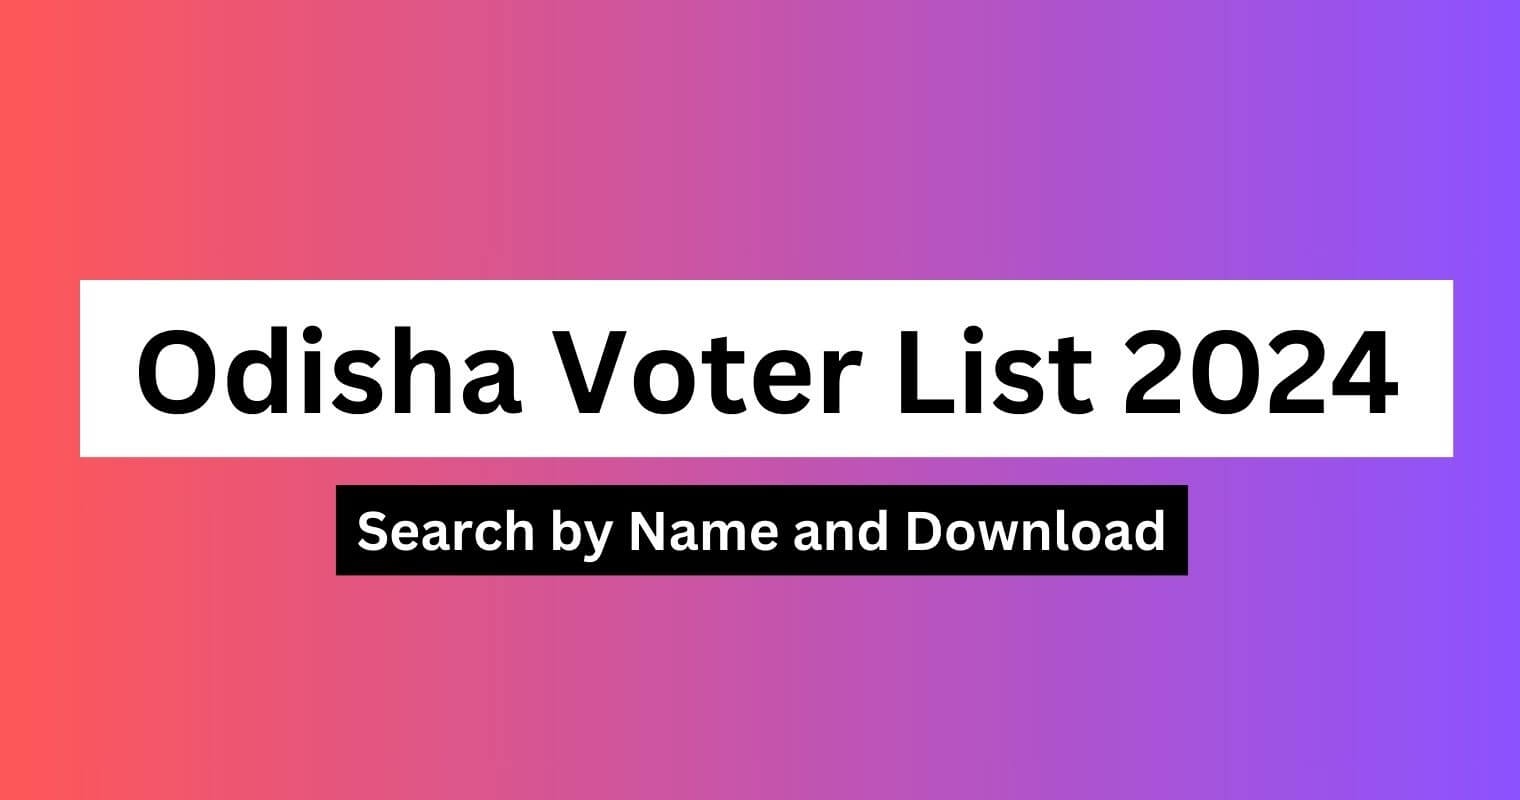 Odisha Voter List 2024 Search By Name, Download